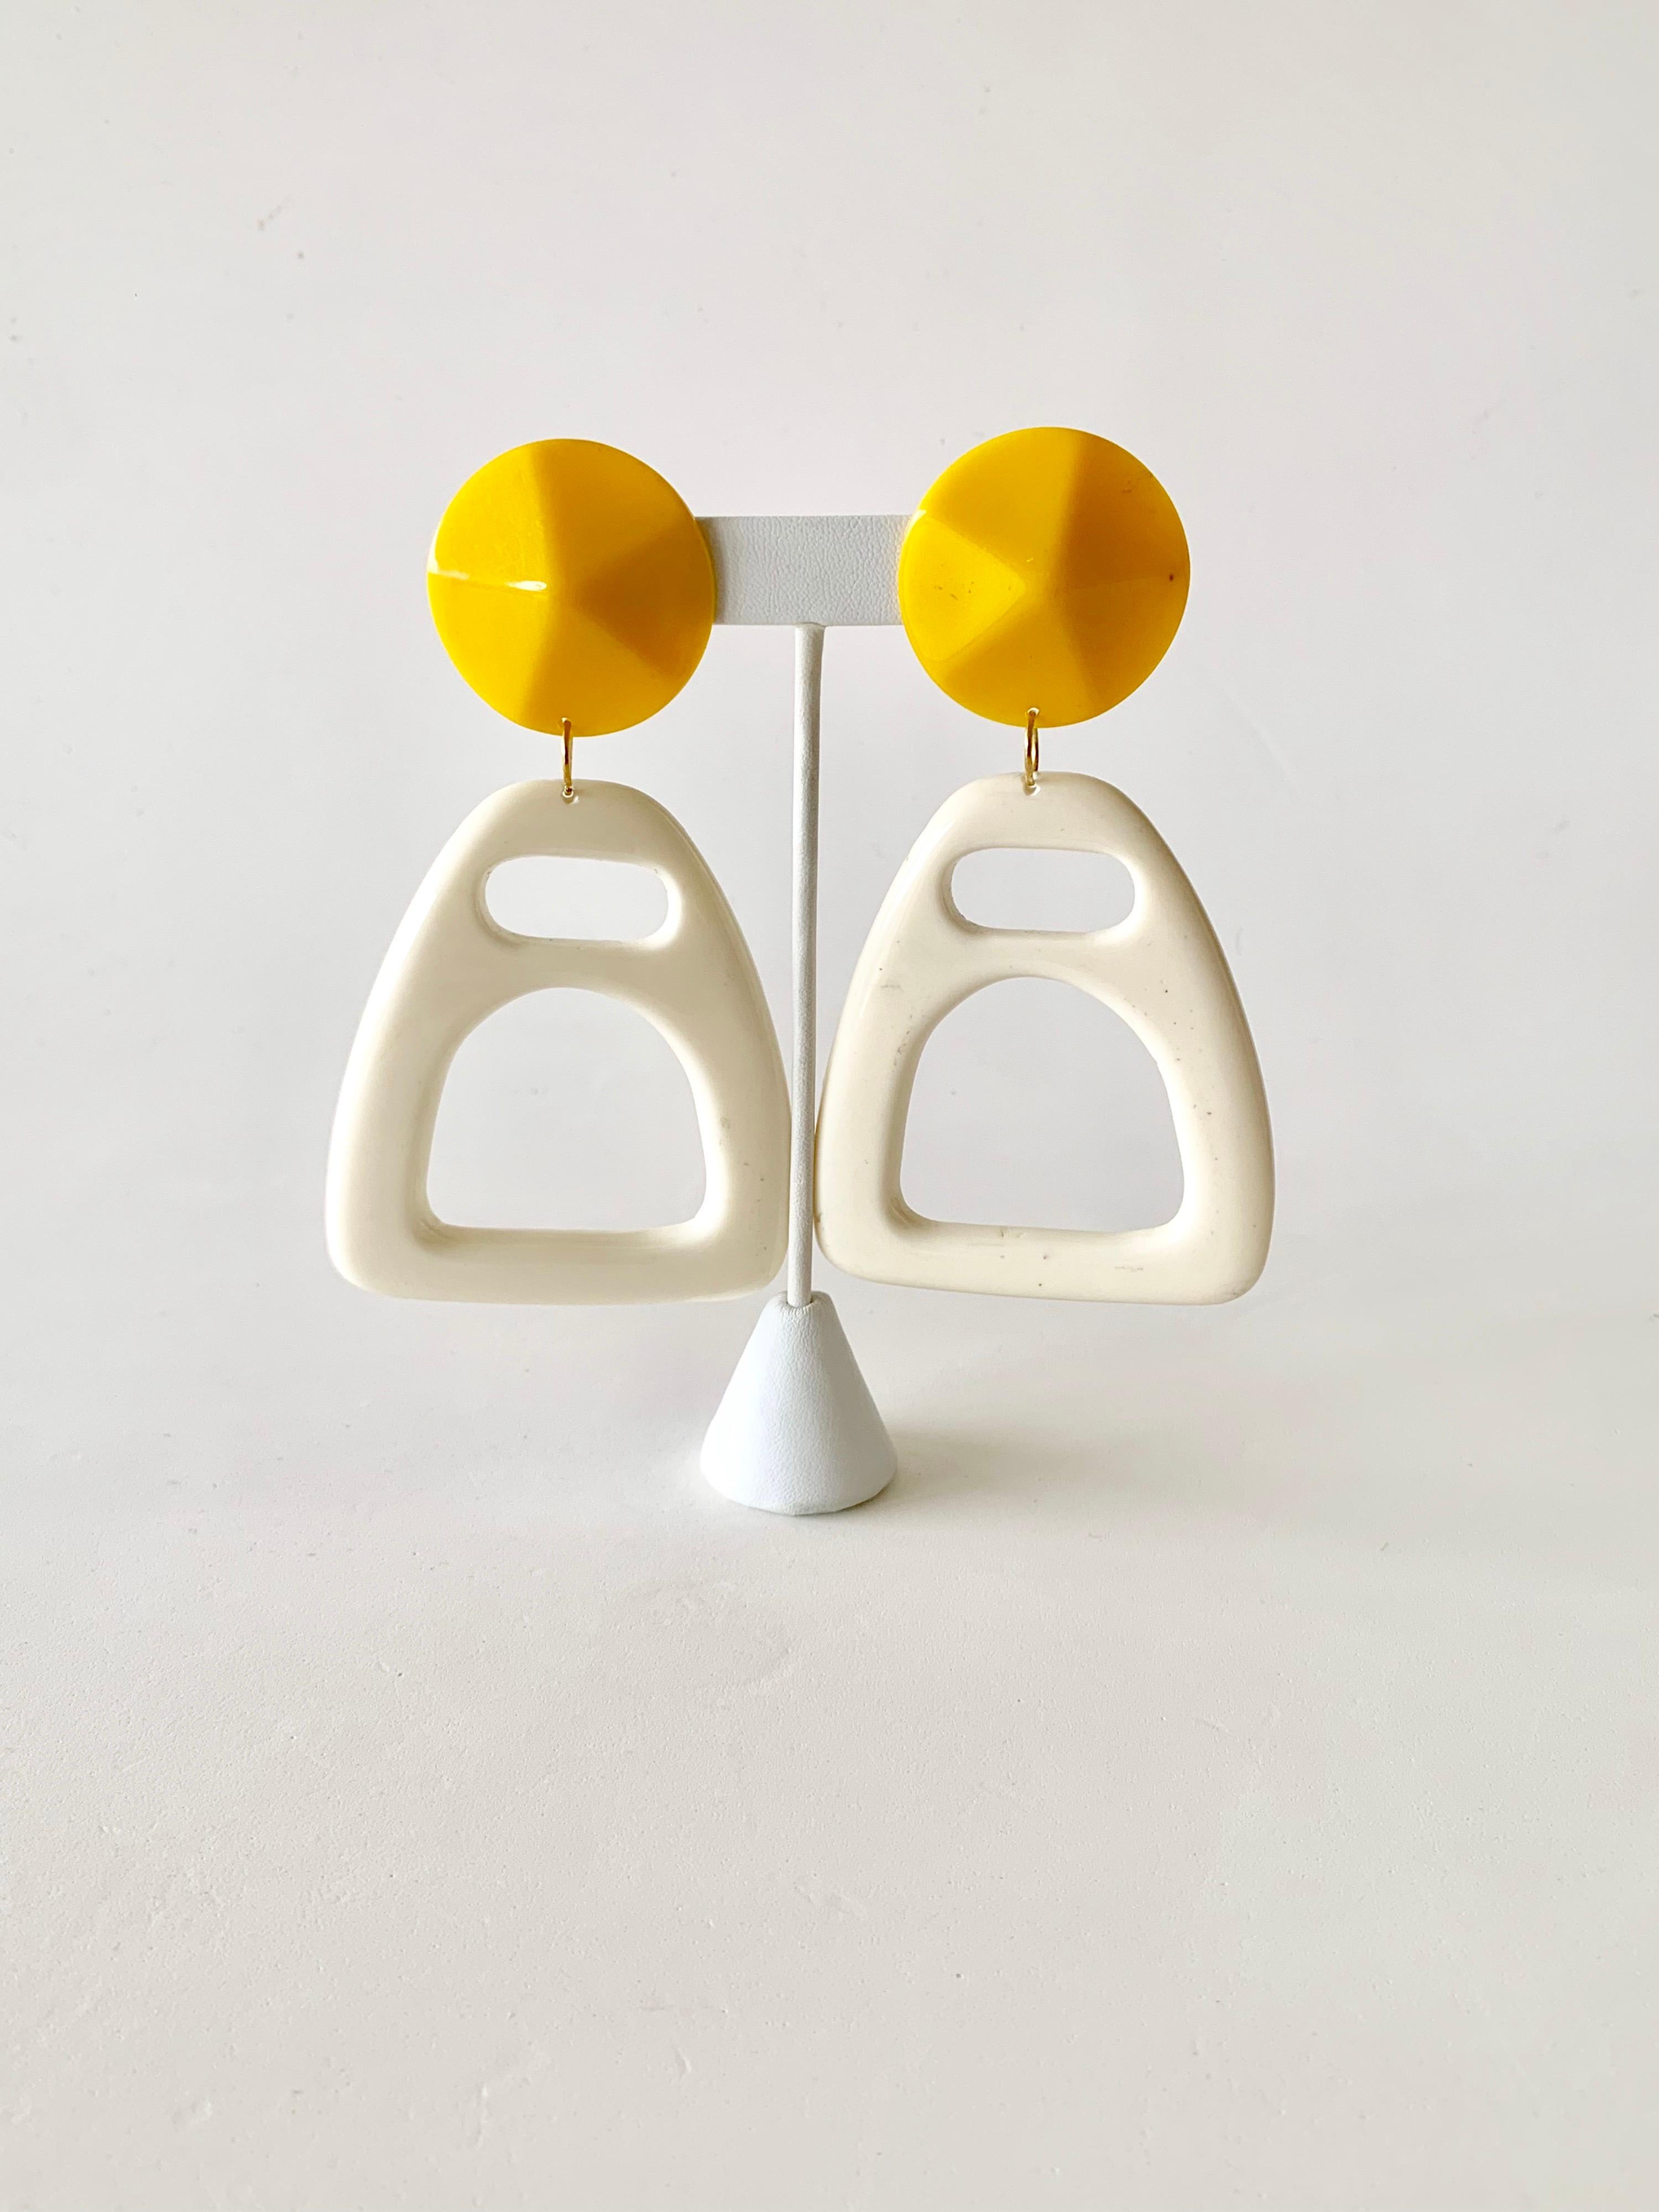 Vintage Mod Oversized Yellow and White Statement Earrings  2